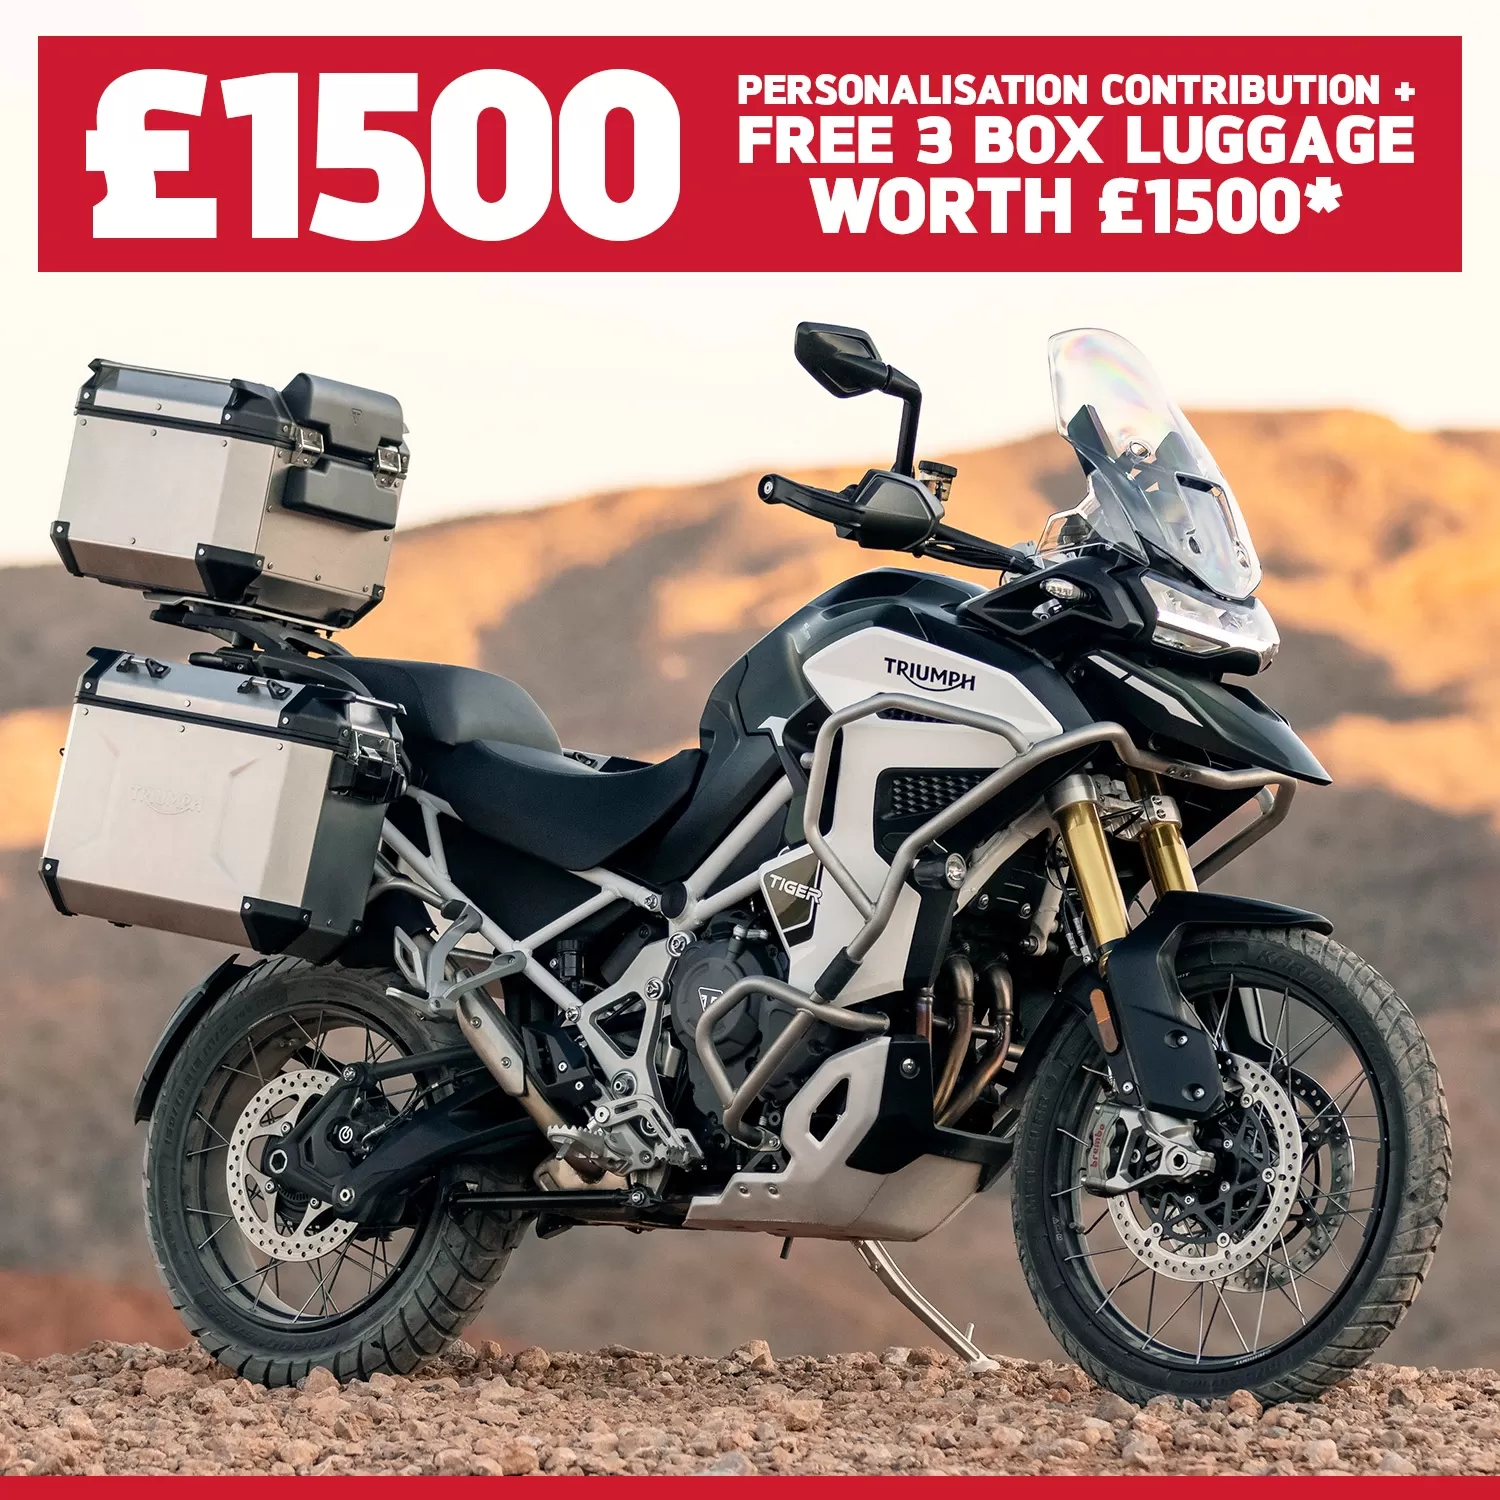 Tiger 1200 Rally Pro Luggage Offer